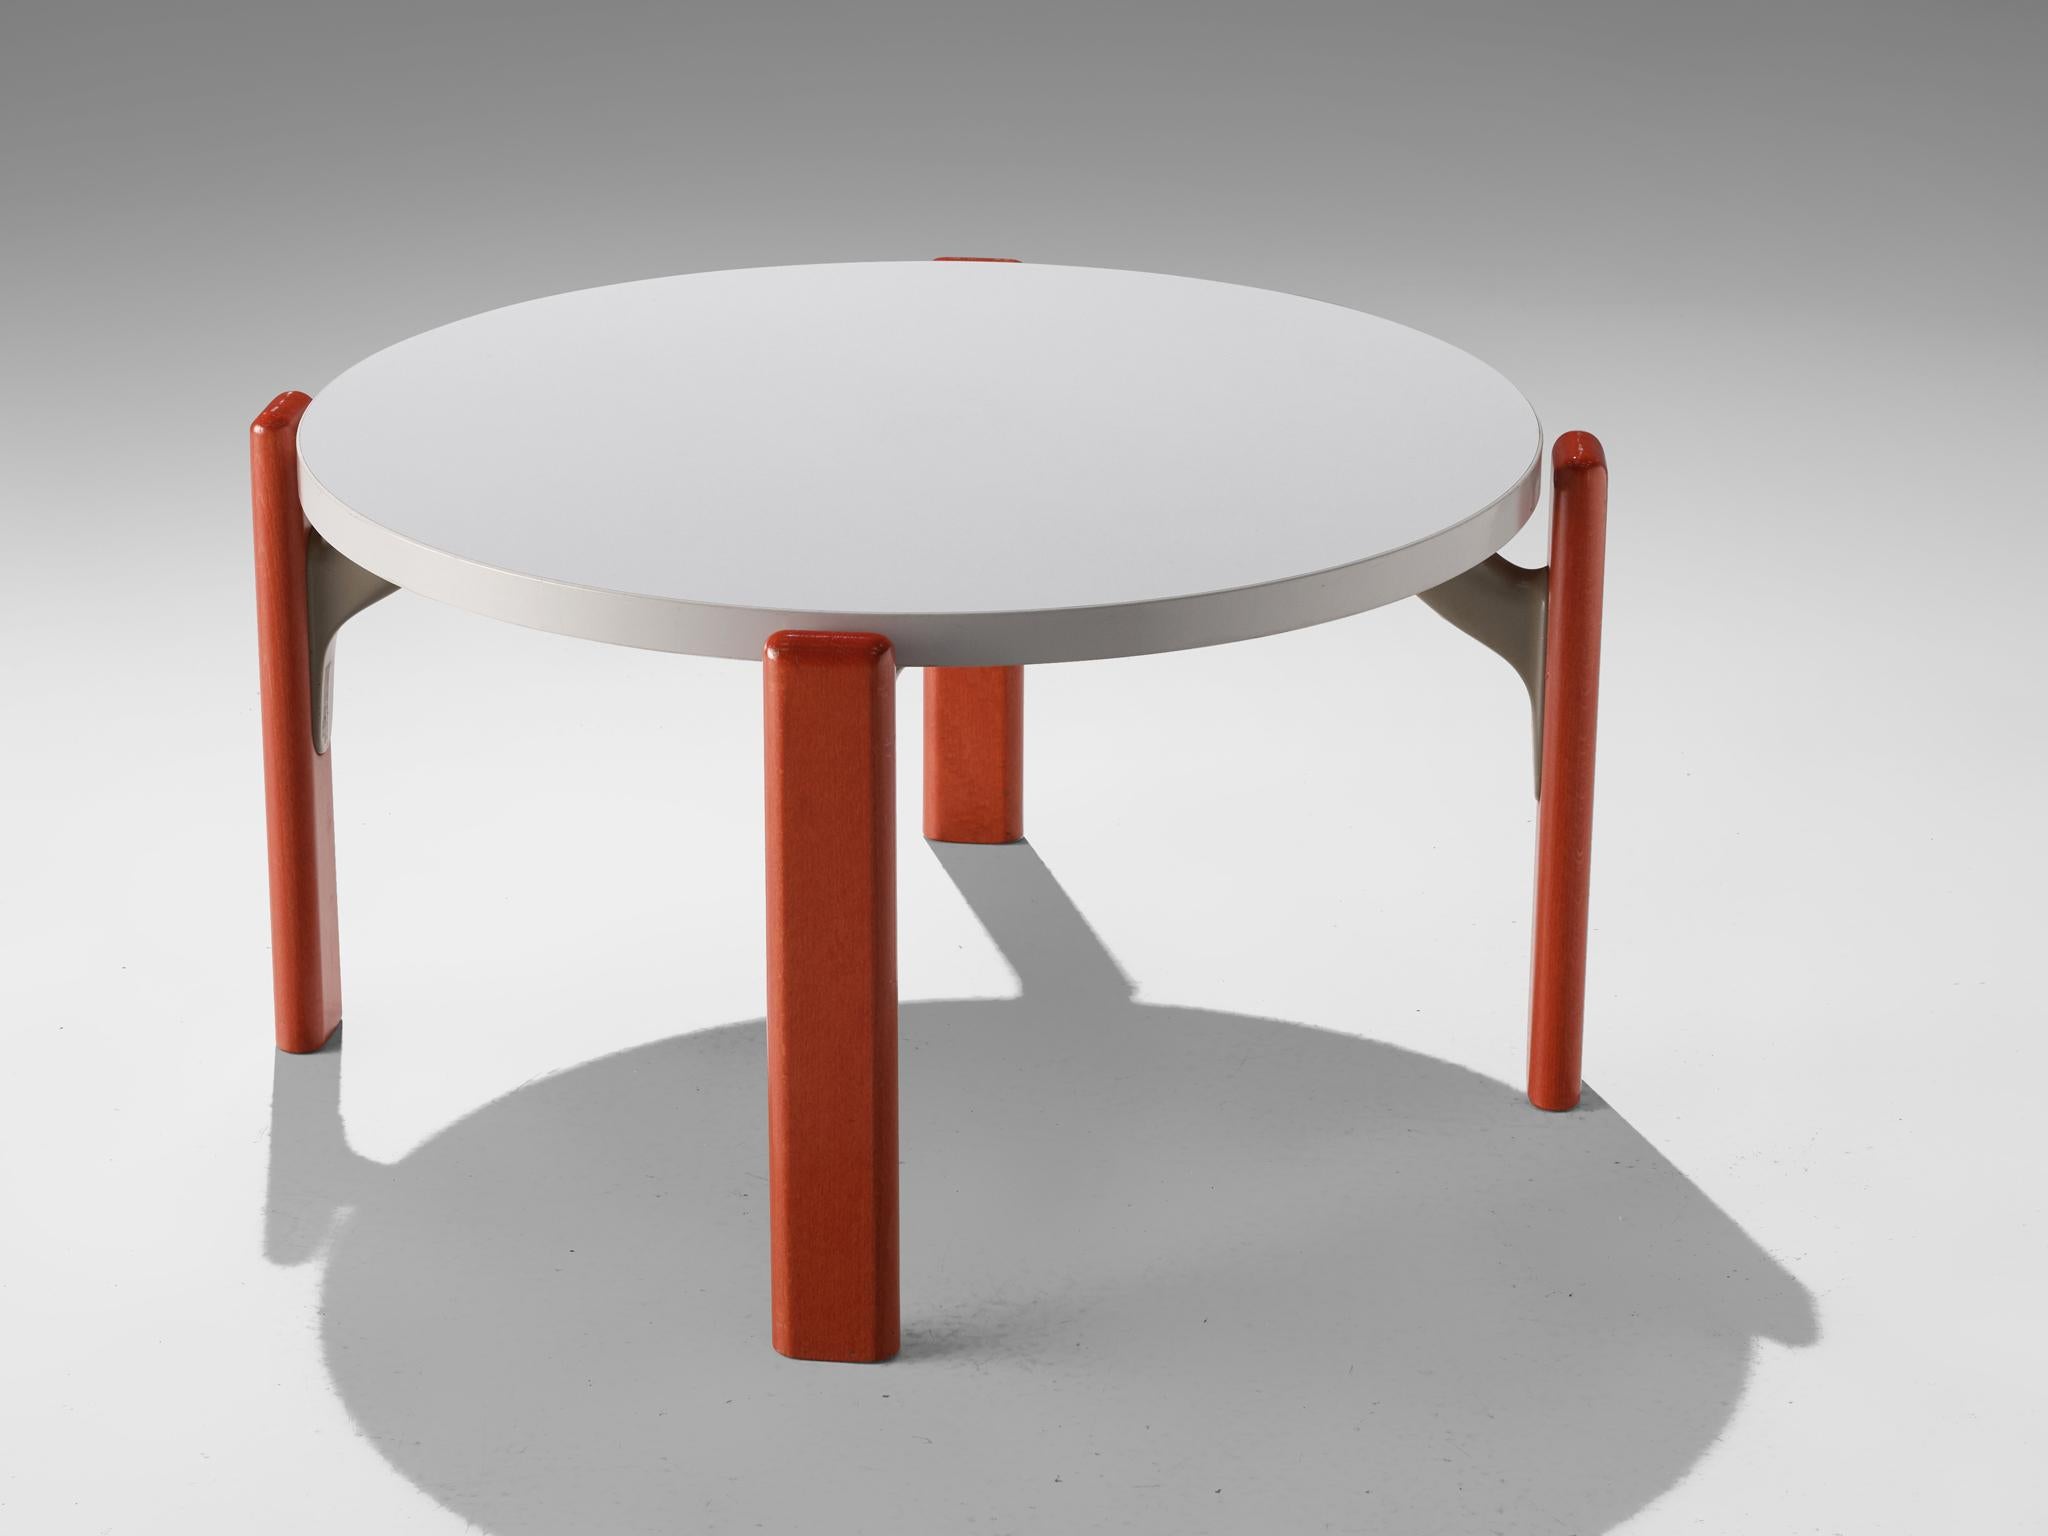 Bruno Rey for Dietiker, coffee table, plywood, Switzerland, 1970s

This coffee table embodies four red lacquered legs and a round white table top. A grey connection hold the legs and the top together. Special feature is the possibility to stack the